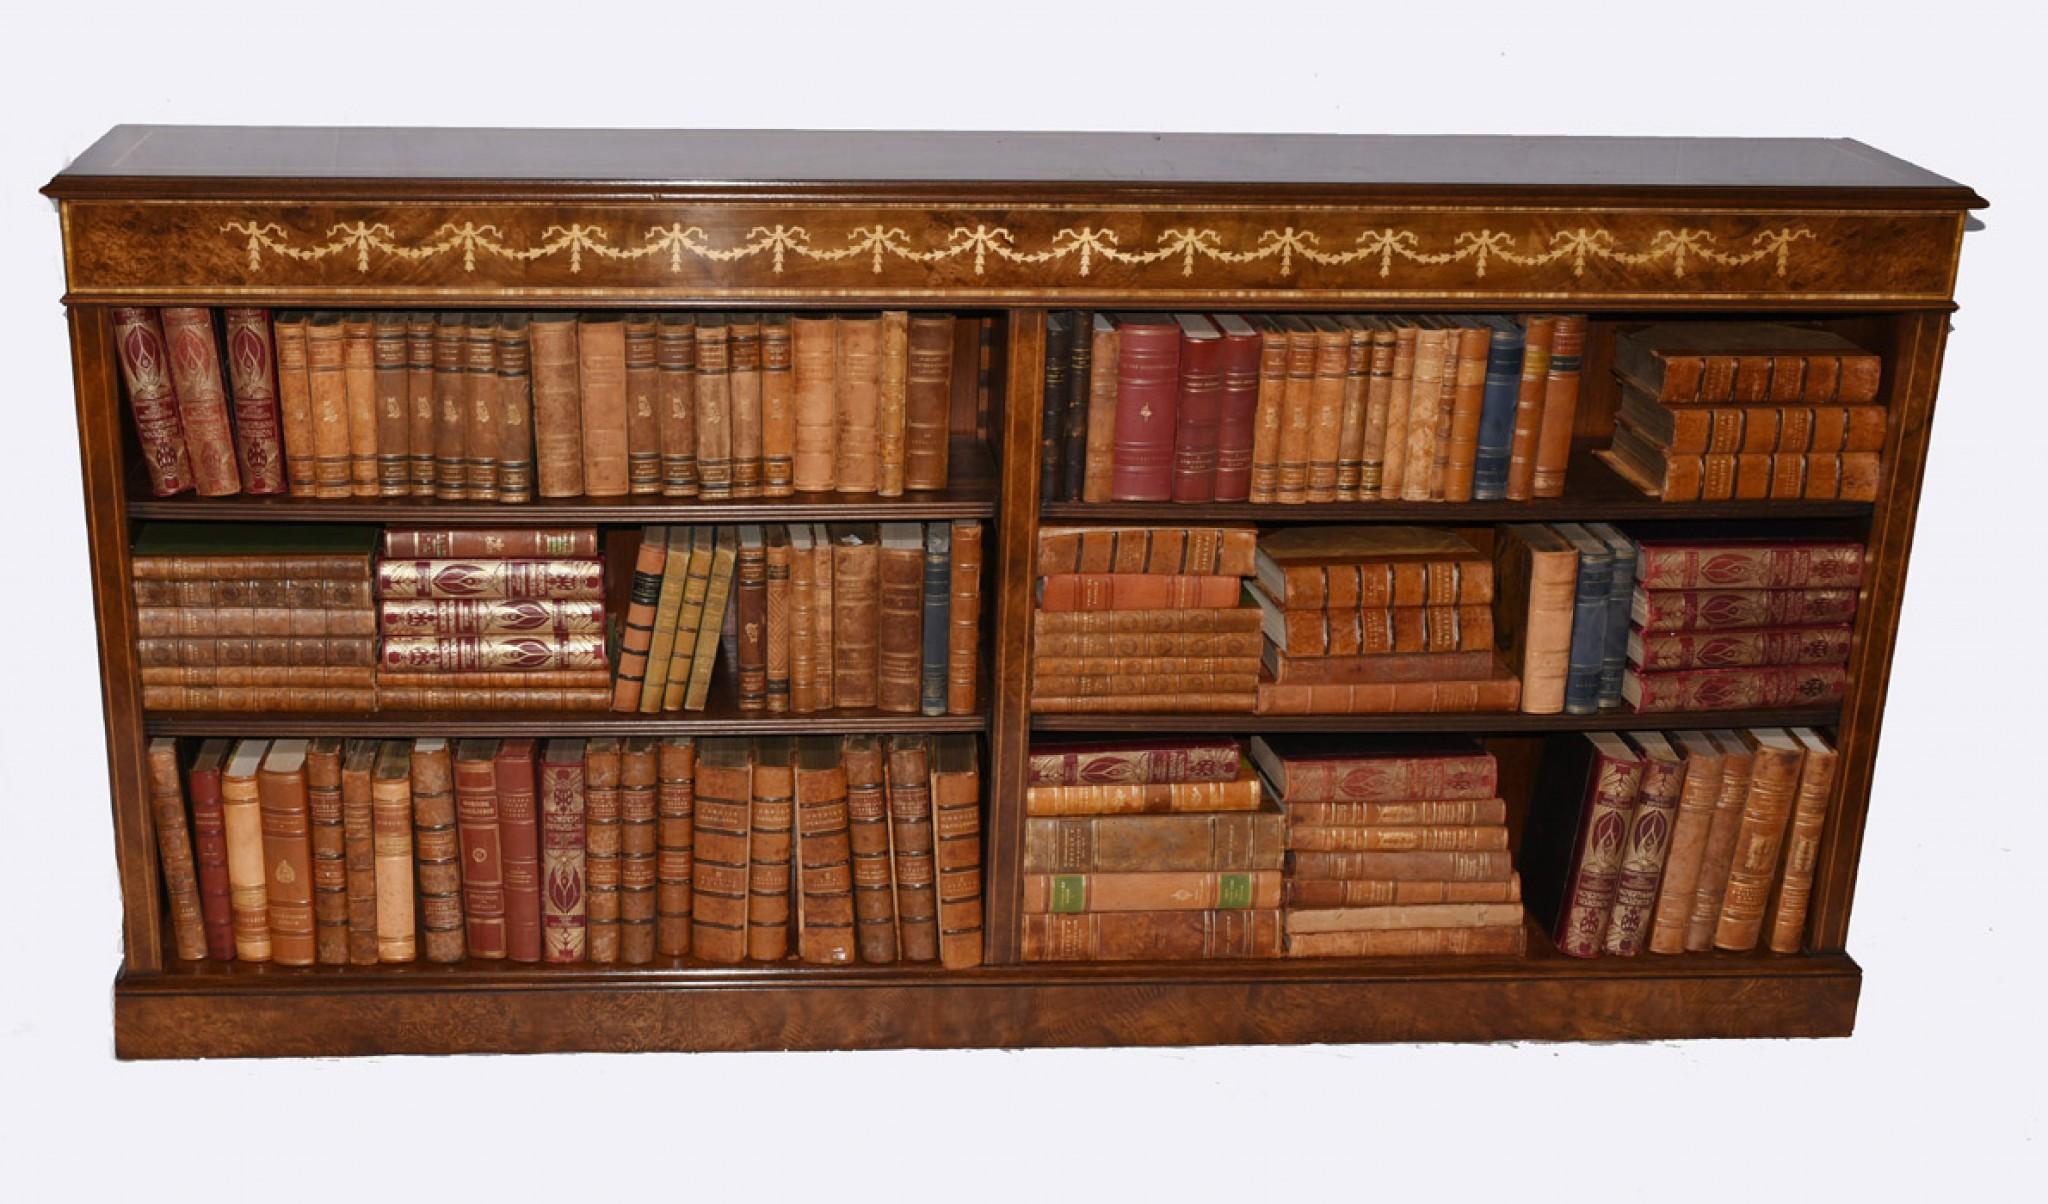 Walnut Open Bookcase, Regency Inlay Bookcases Study Interiors In Good Condition For Sale In Potters Bar, GB